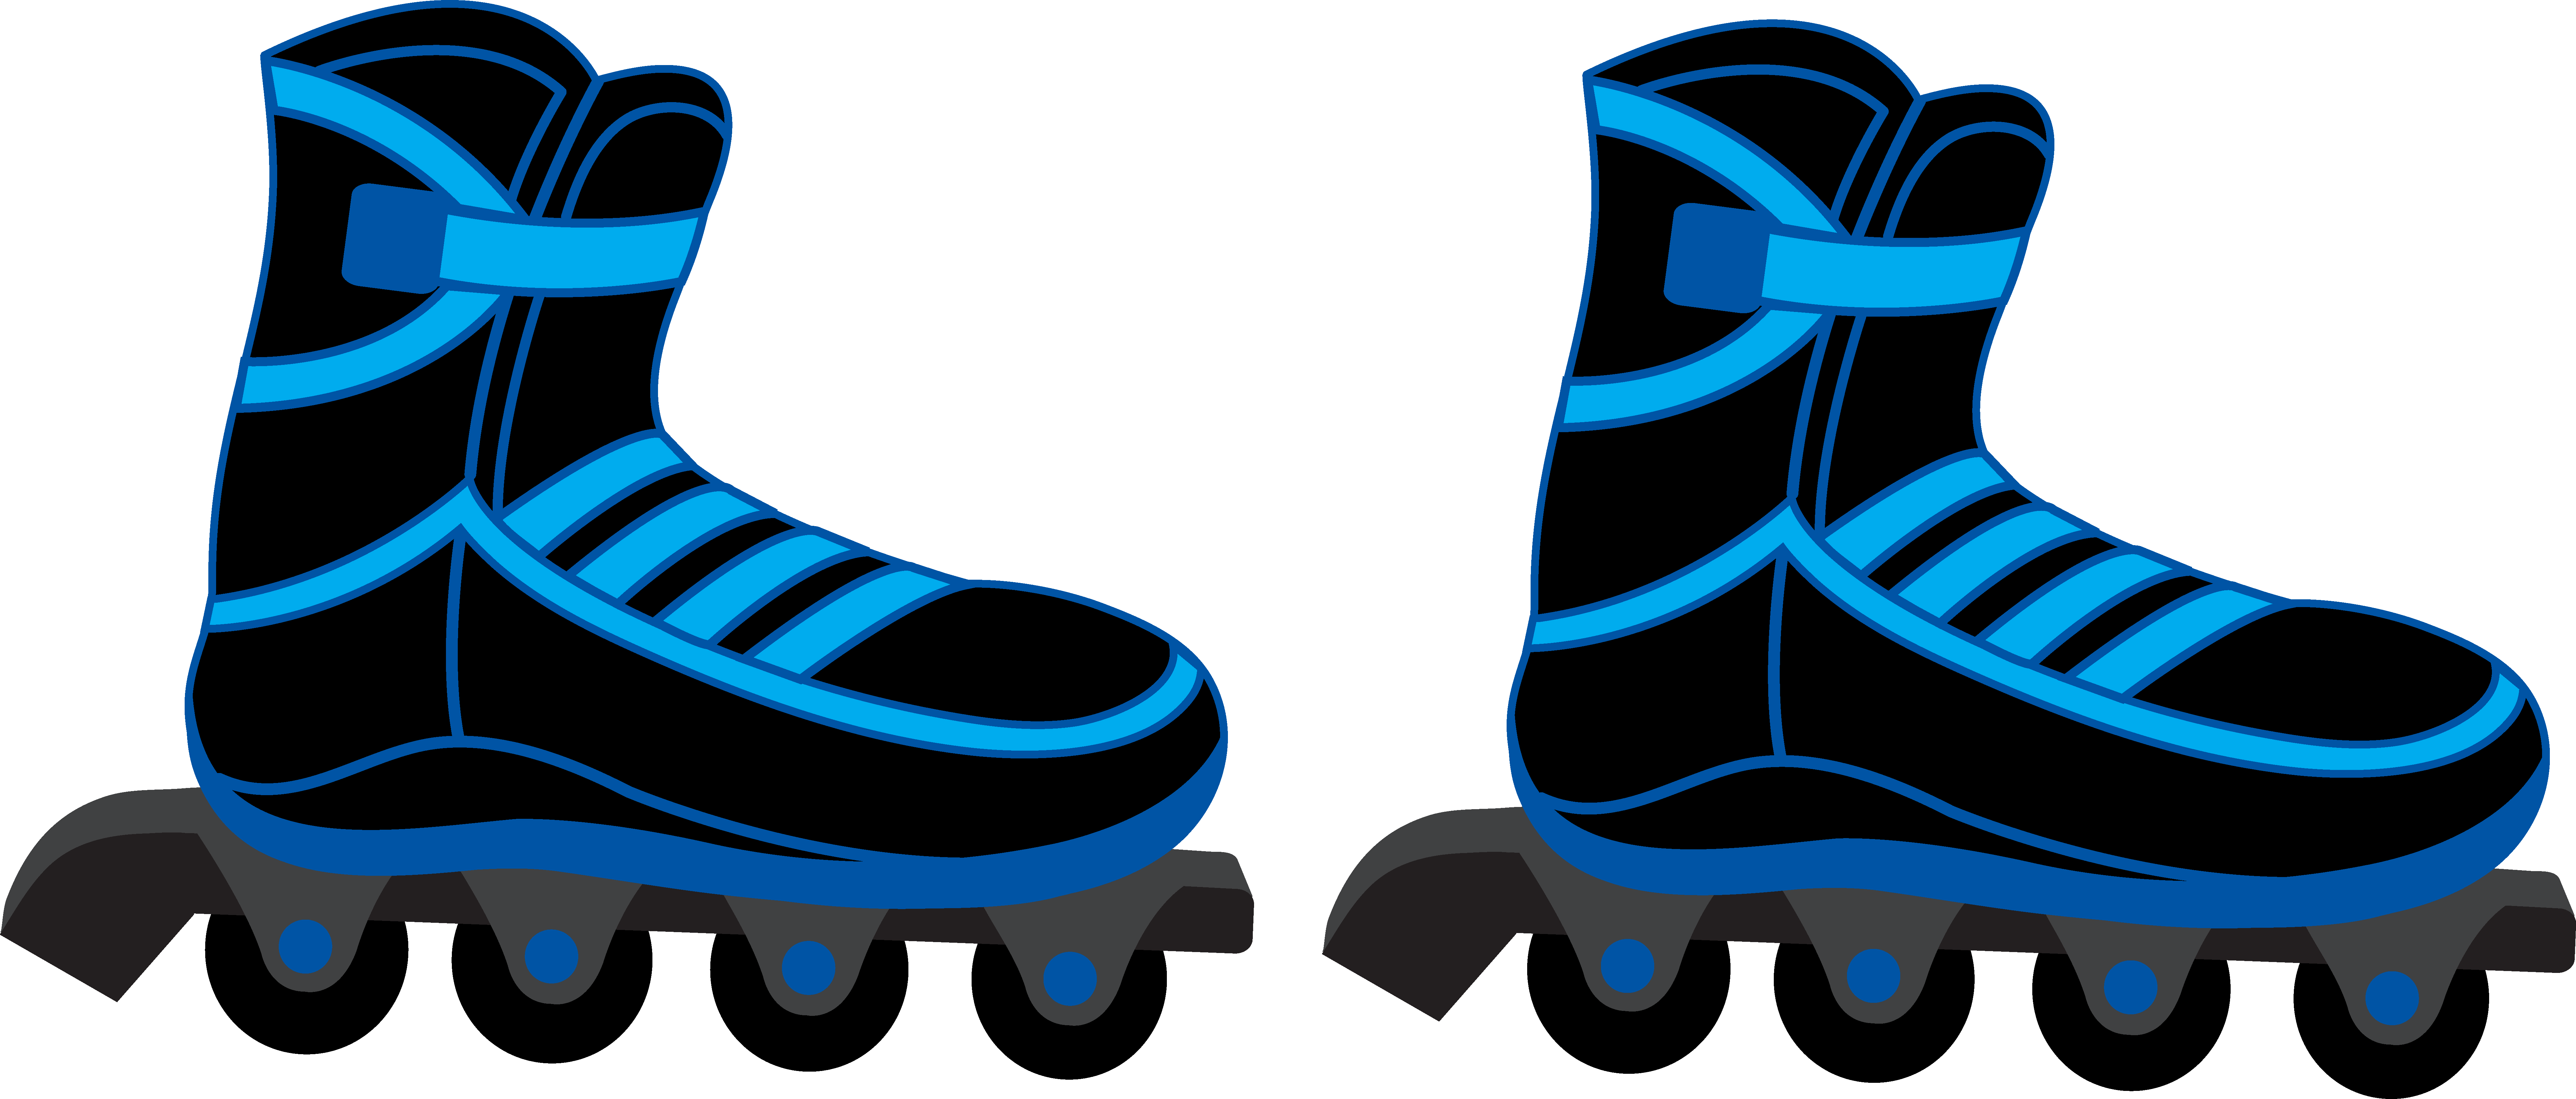 Clip On Rollerblades - ClipArt Best